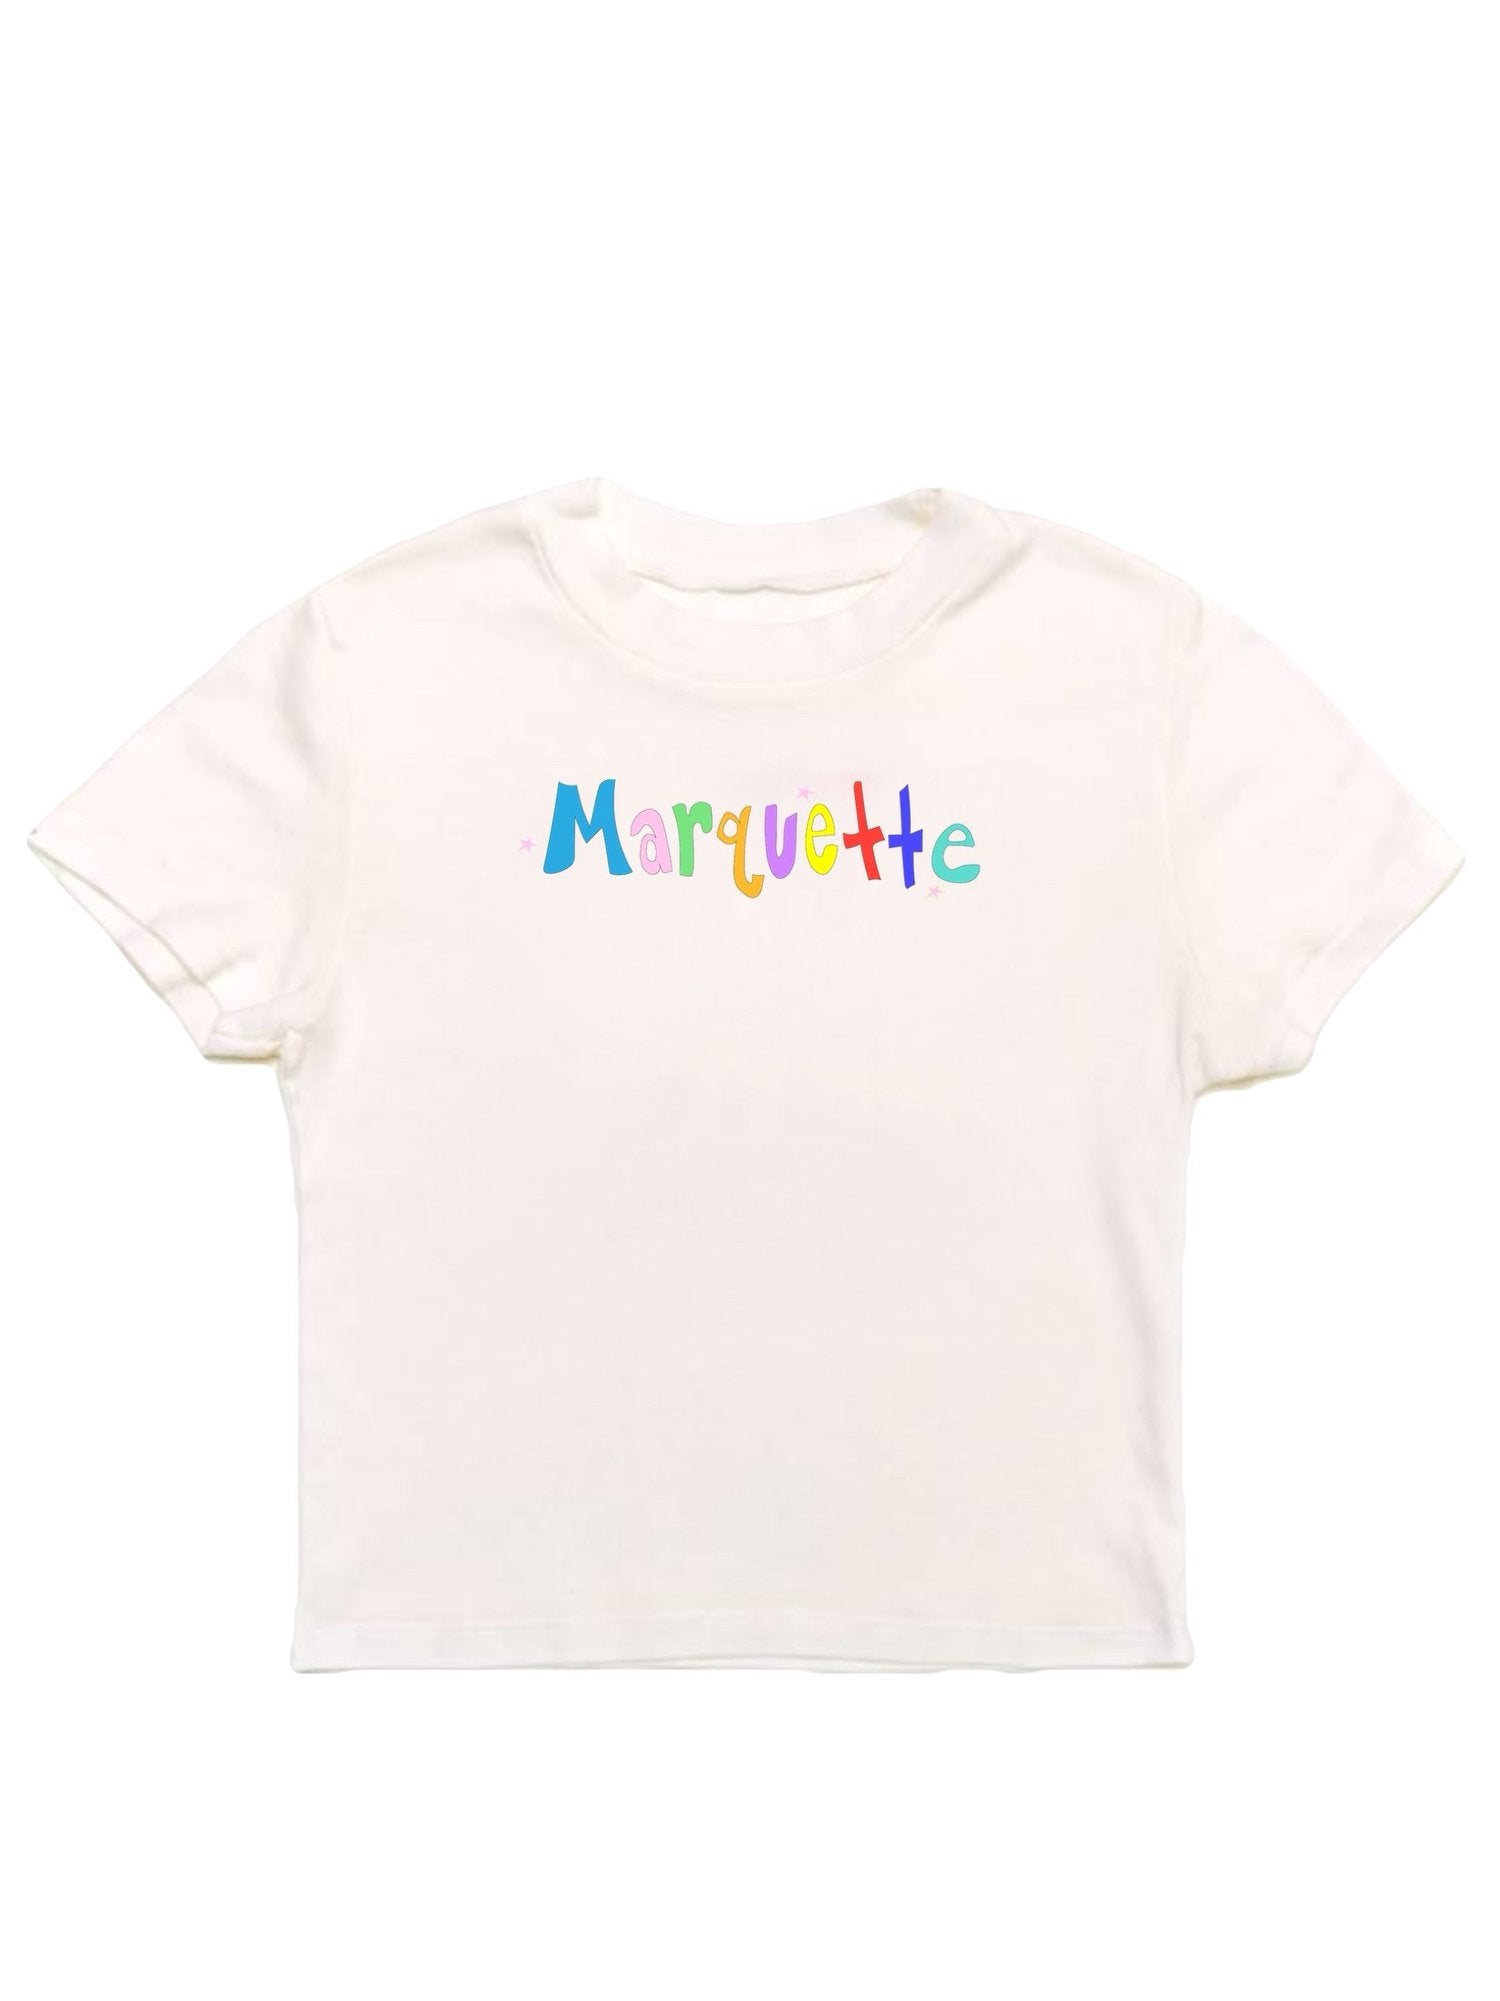 Marquette Baby Tee